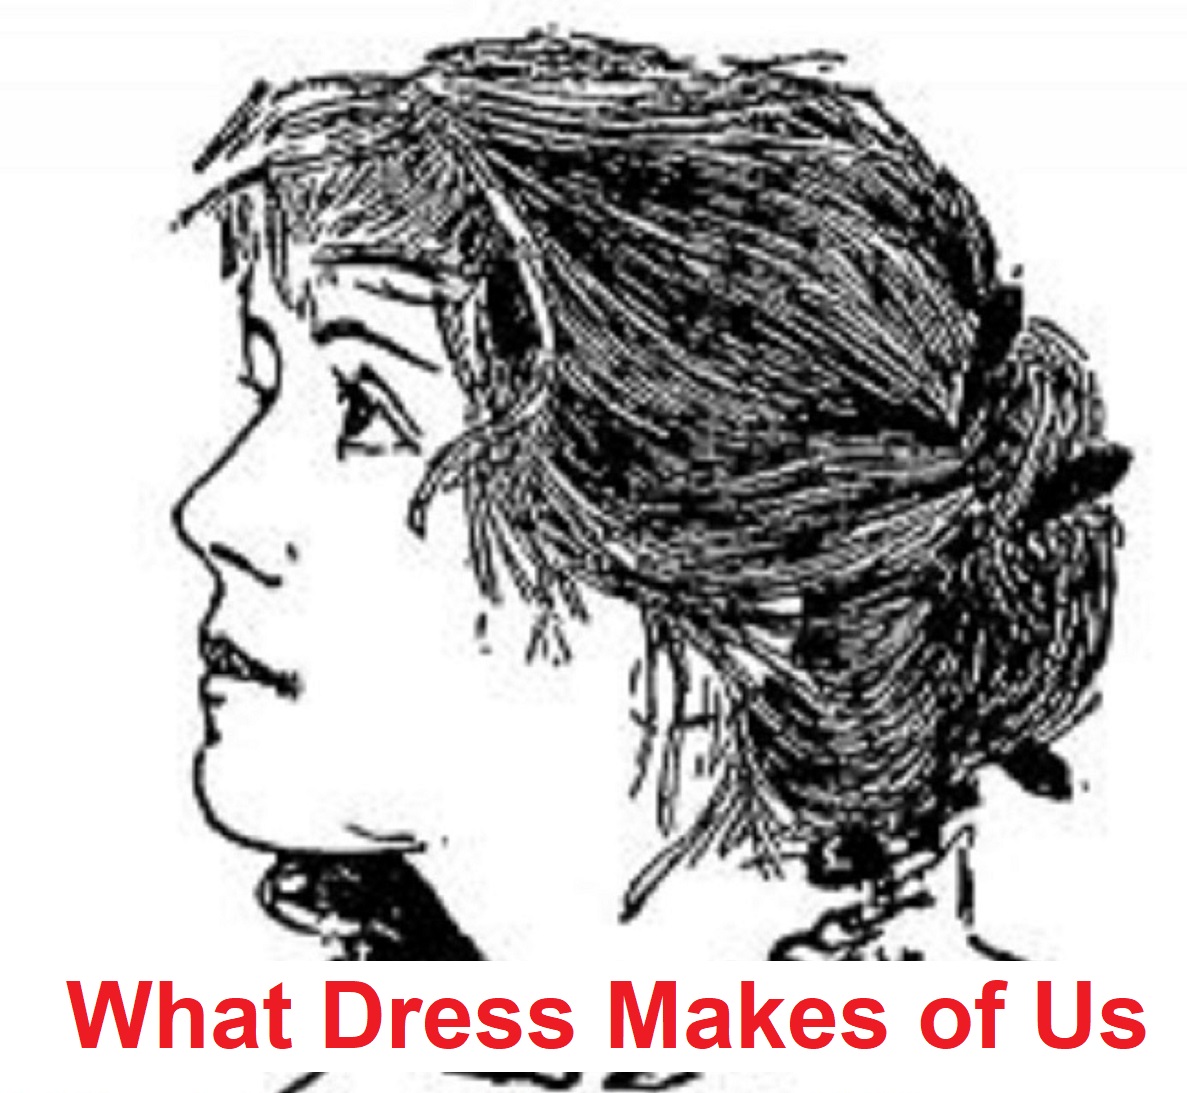 What DressMakes of Us